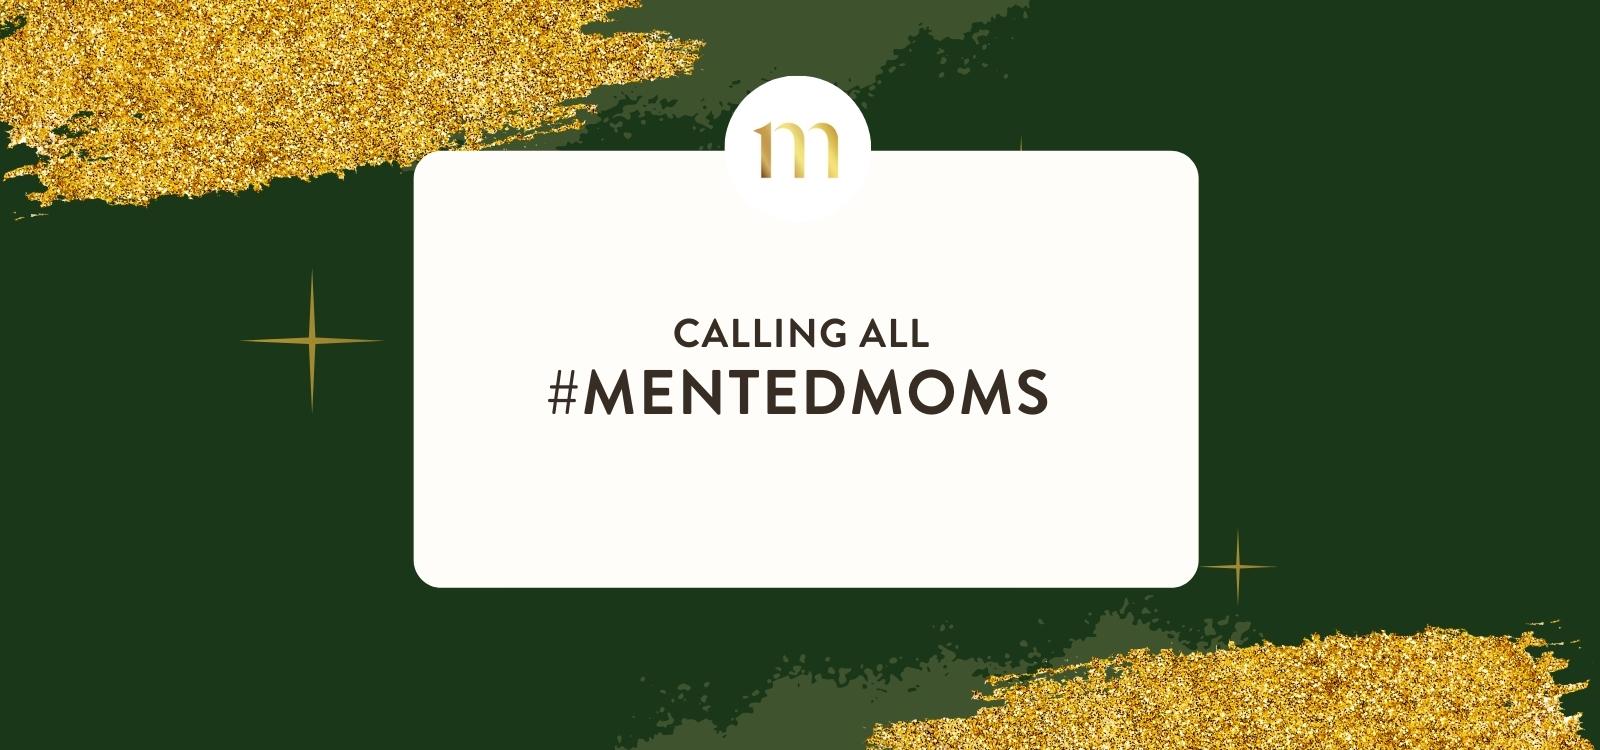 MENTED GIVES BACK TO MOMS  - CLOSED